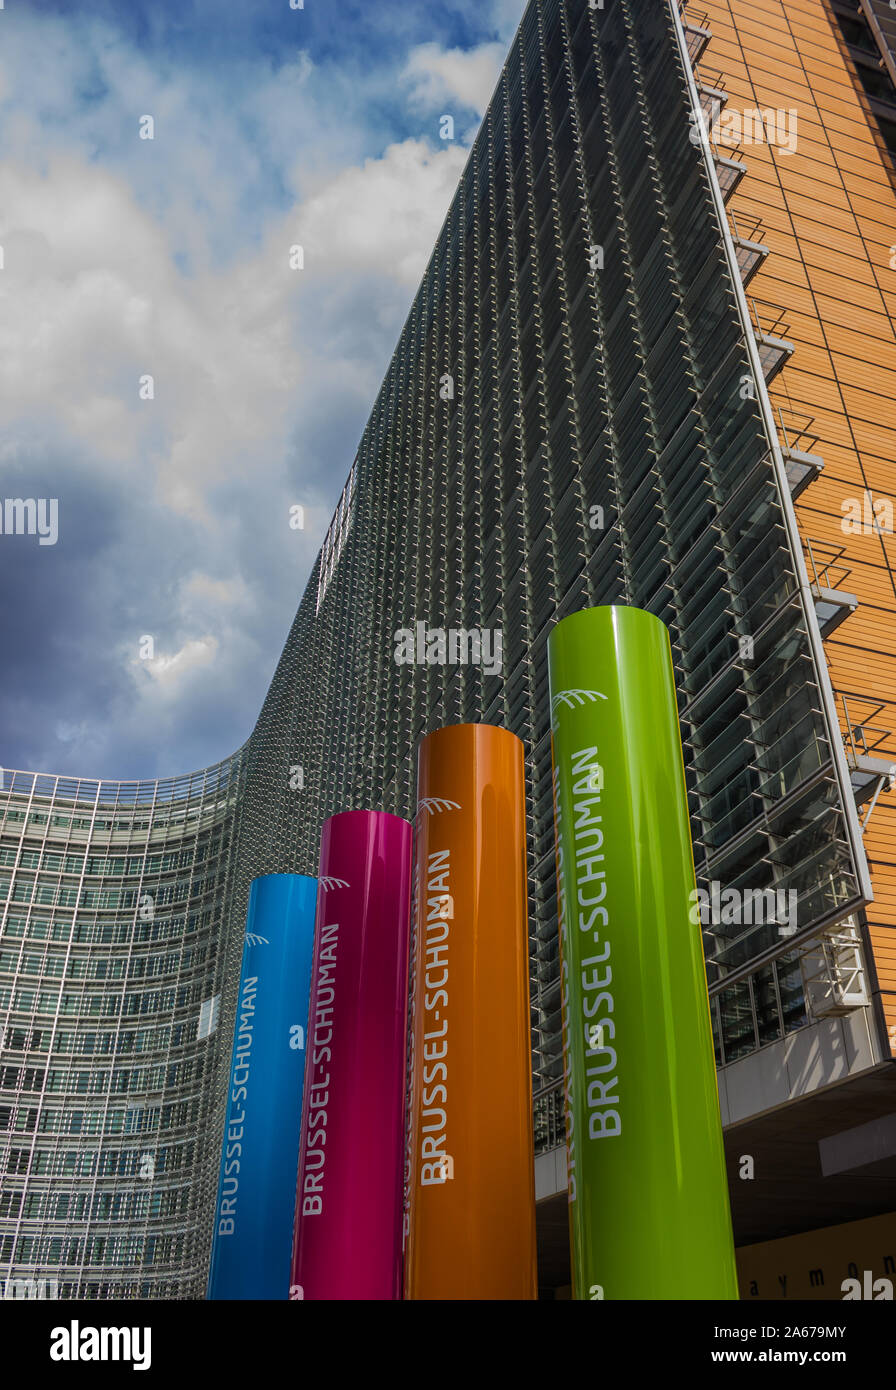 A picture of the transportation hub colorful columns at the bottom of the Le Berlaymont building (Brussels). Stock Photo